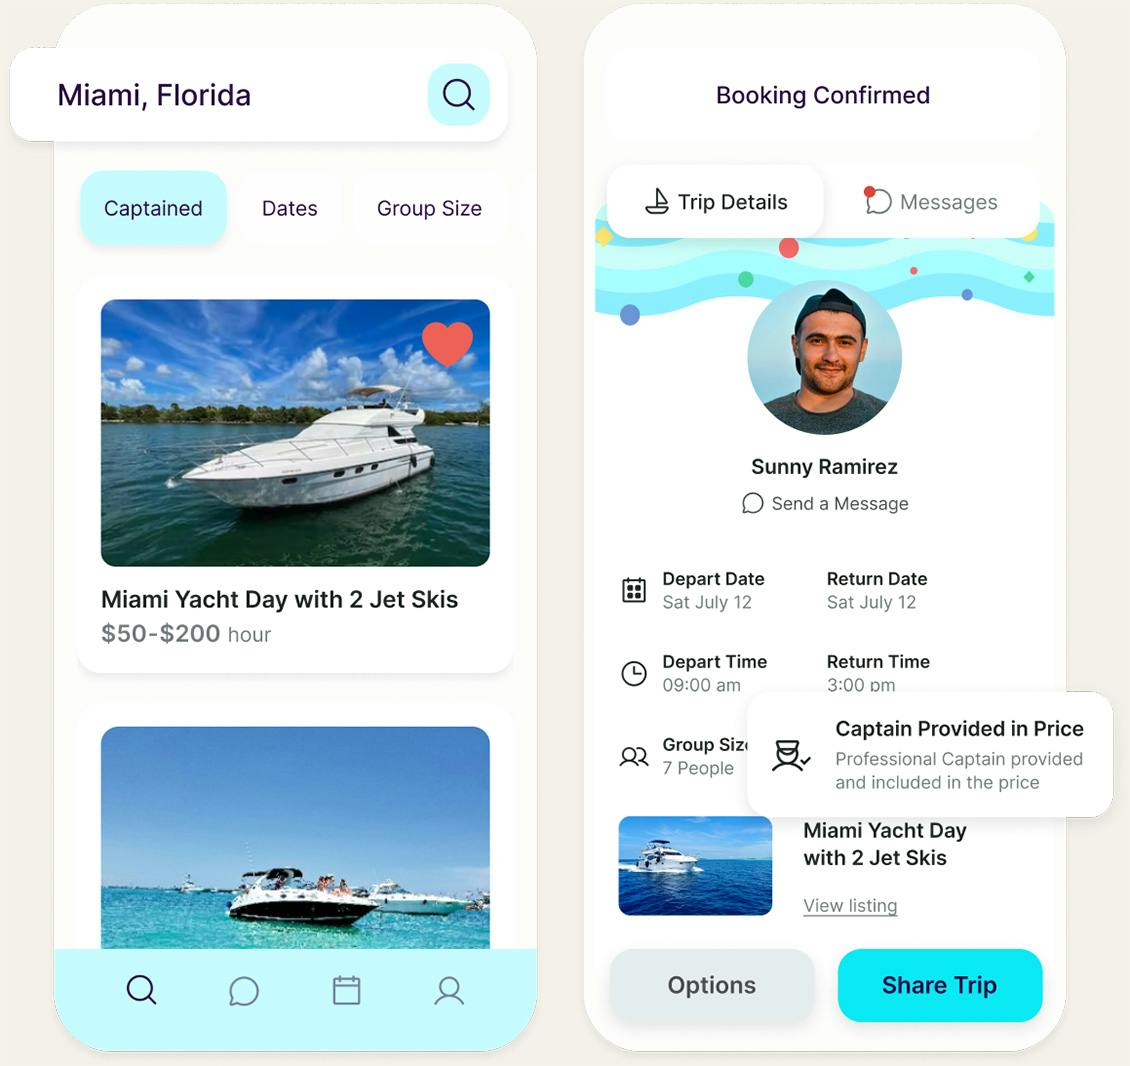 Mobile app images highlighting features of search and booking trip with captain included in price